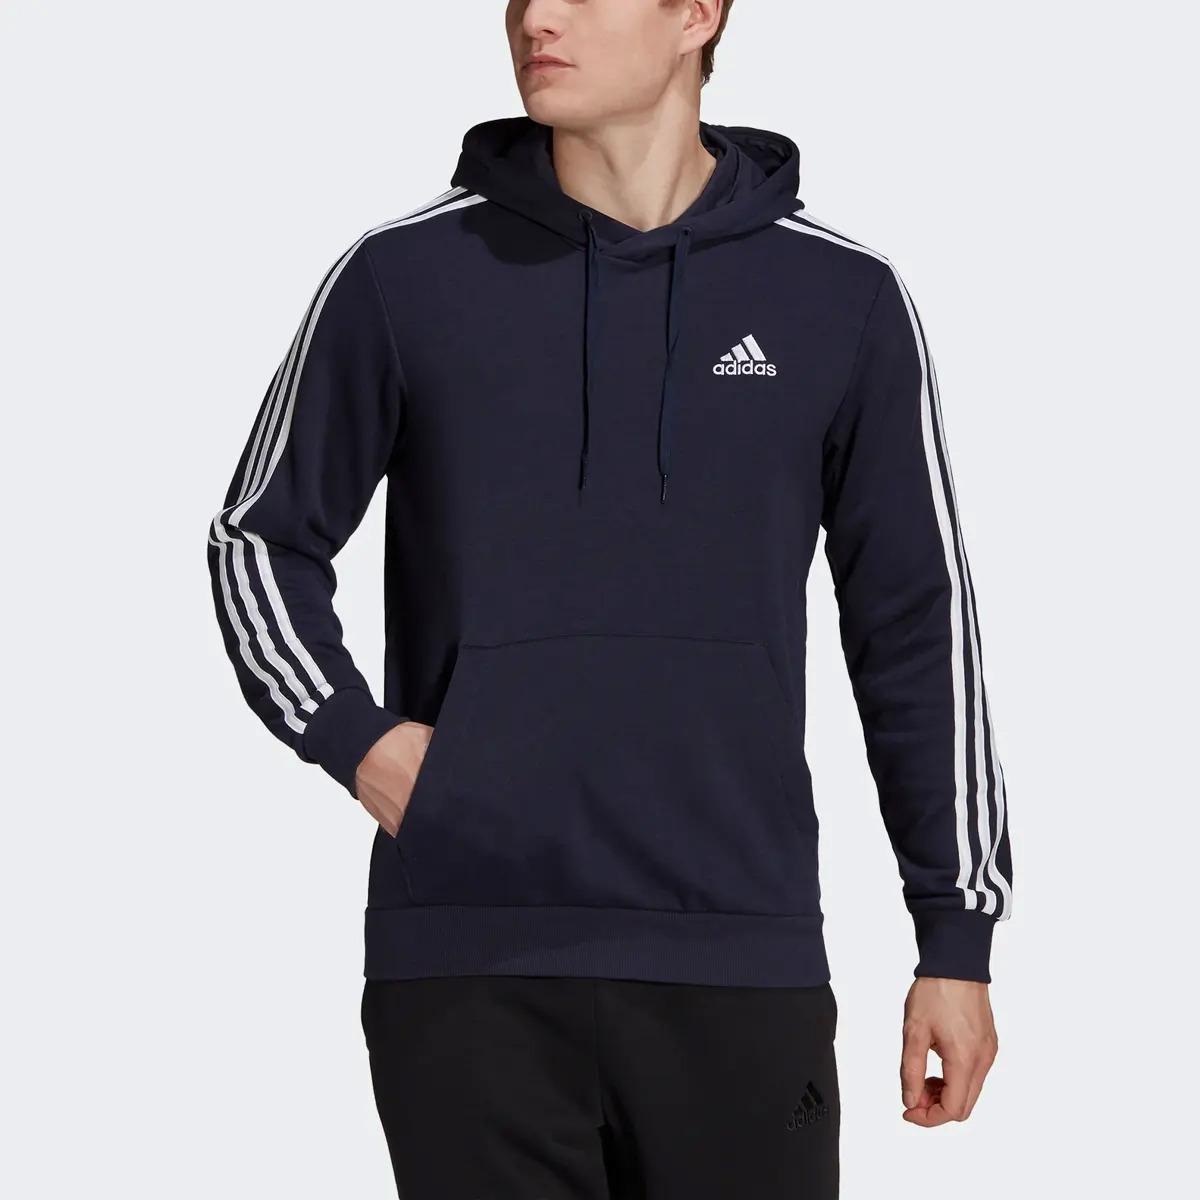 adidas Mens Essentials French Terry 3-Stripes Hoodie for $16.08 Shipped